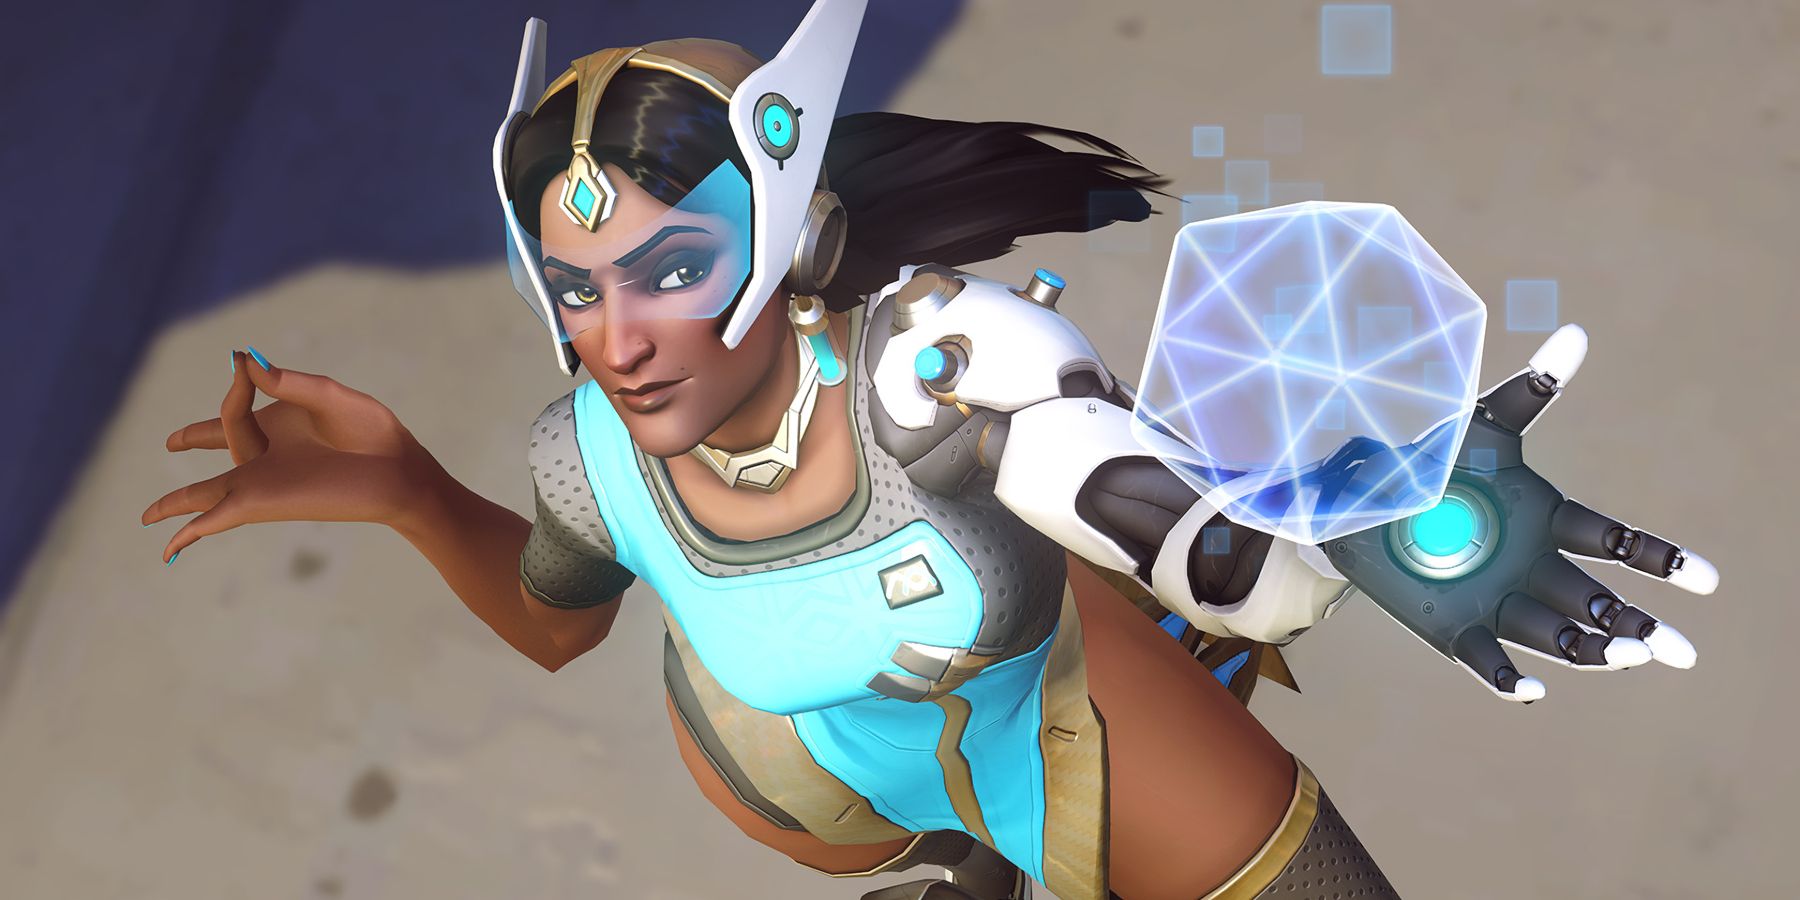 Overwatch 2 Clip Shows Genius Symmetra Teleporter Play Save Teammate at the Last Second